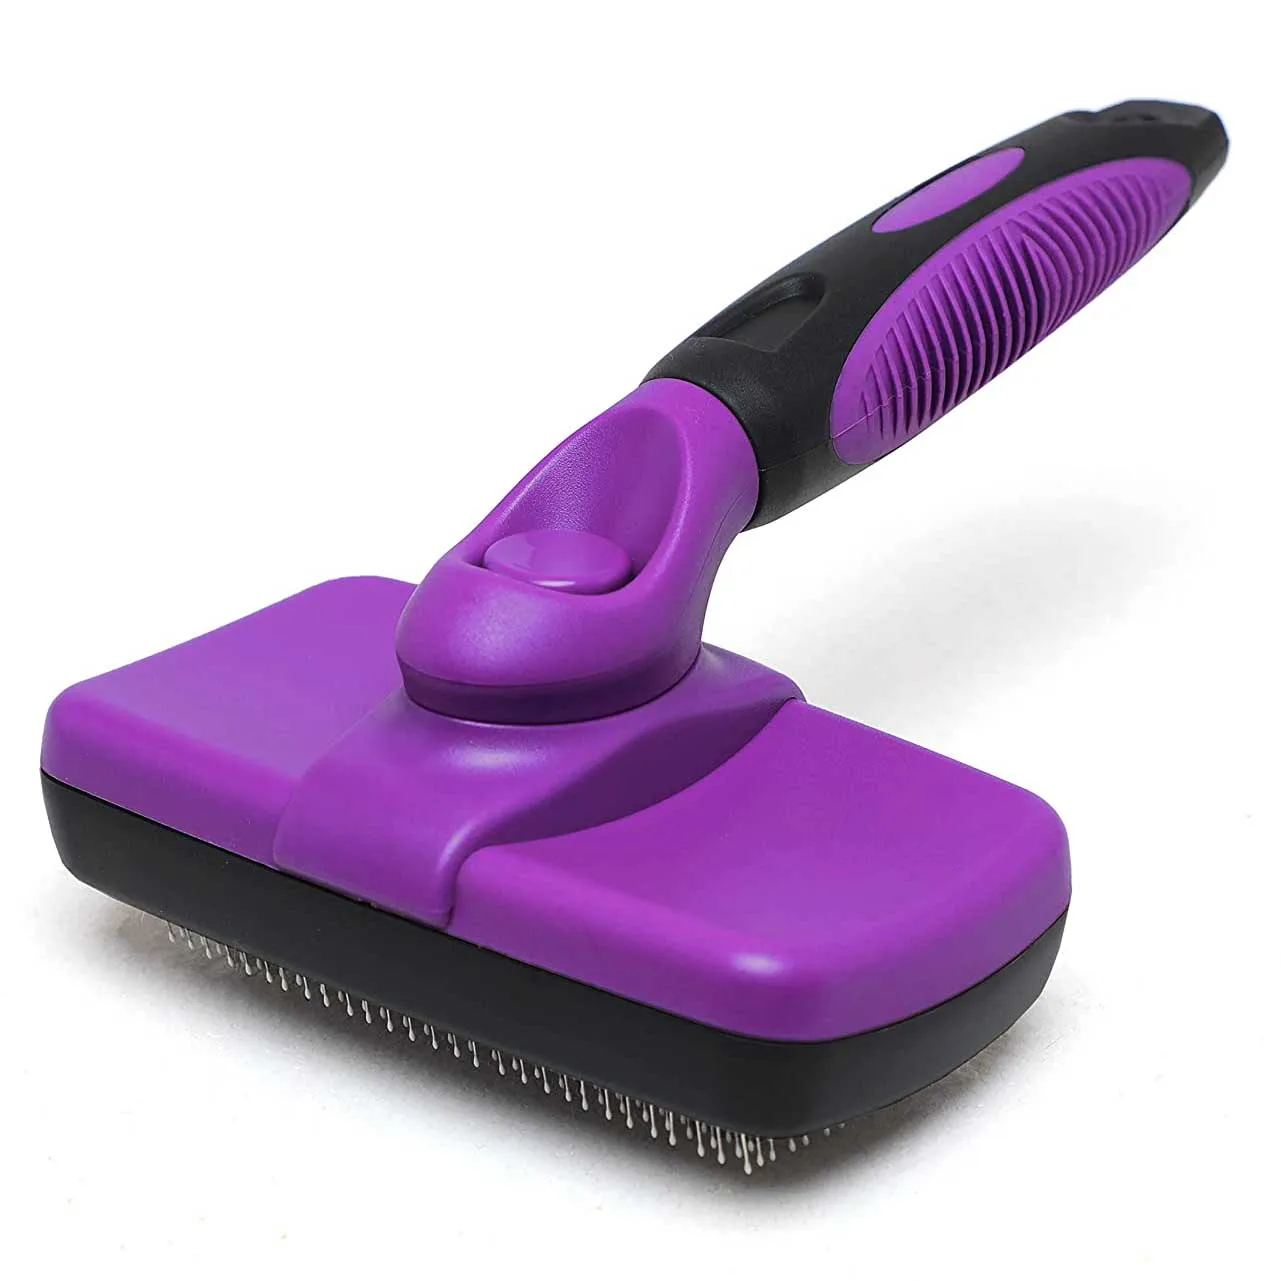 

Pet Dematting and Detangling Comb Self-Cleaning Brushes Dog Cat Hair Remover Brush for Shedding and Grooming Pet Slicker Brush